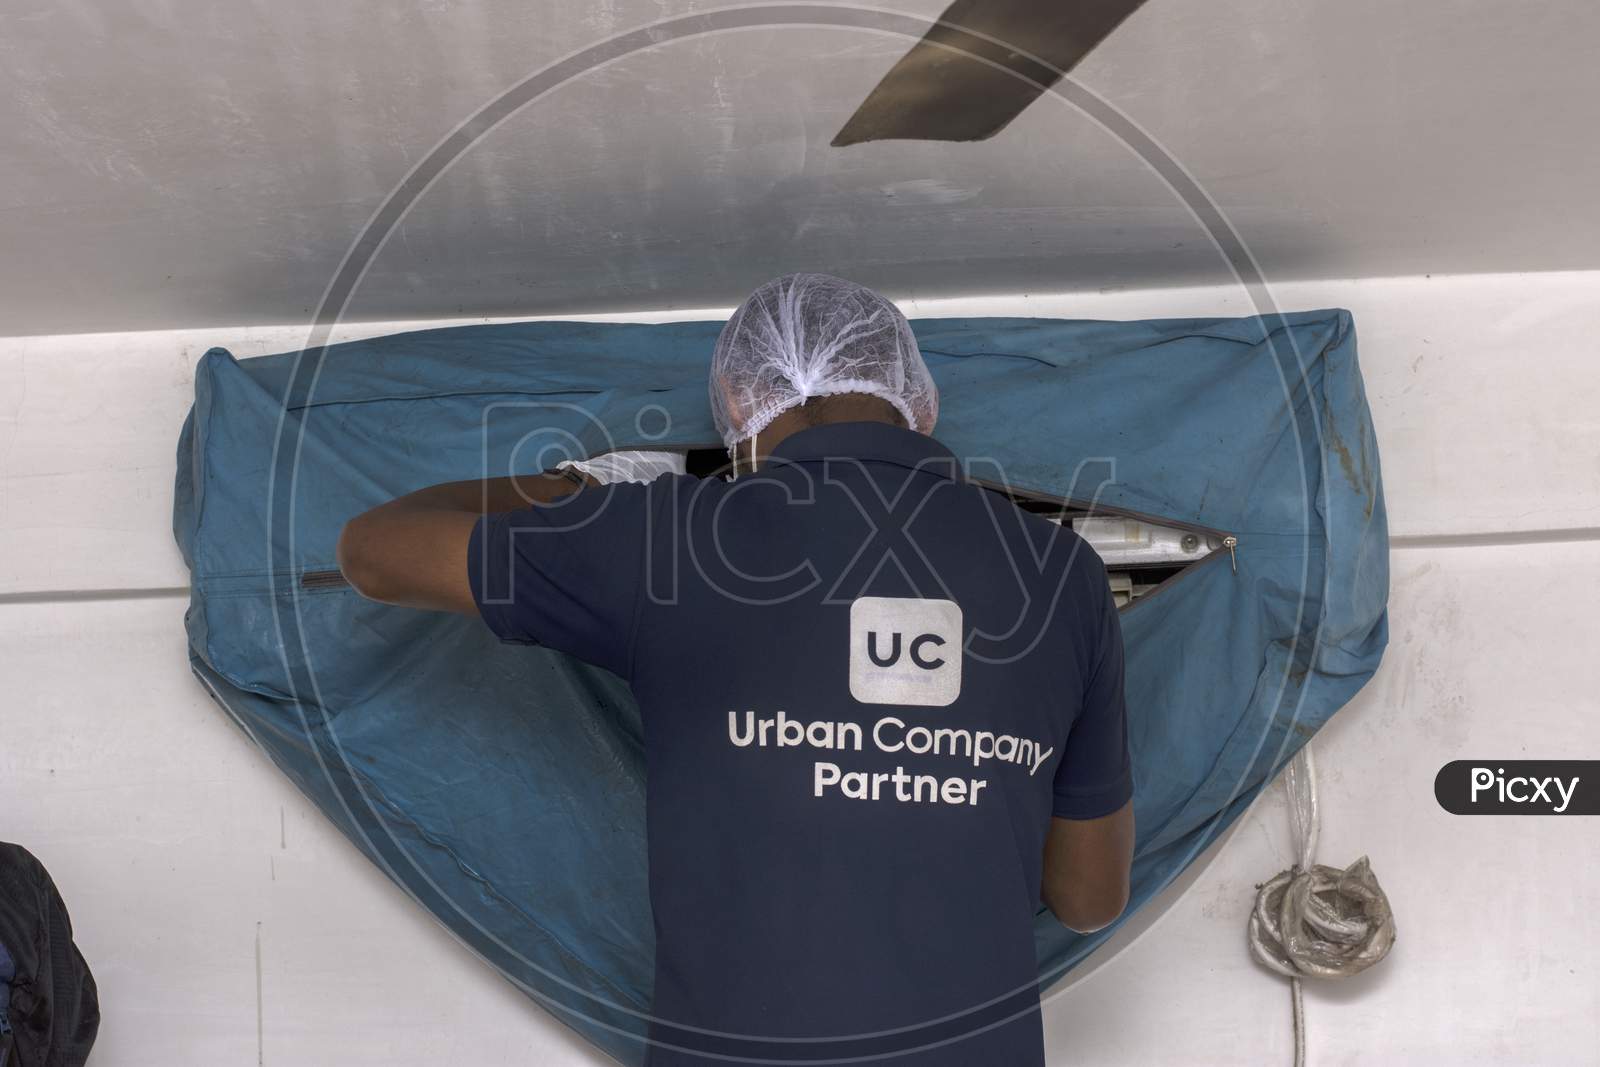 29Th May, 2021, Kolkata, West Bengal India: A Male Service Person From Urban Company Cleaning Air Condition Machine With Jet Spry.